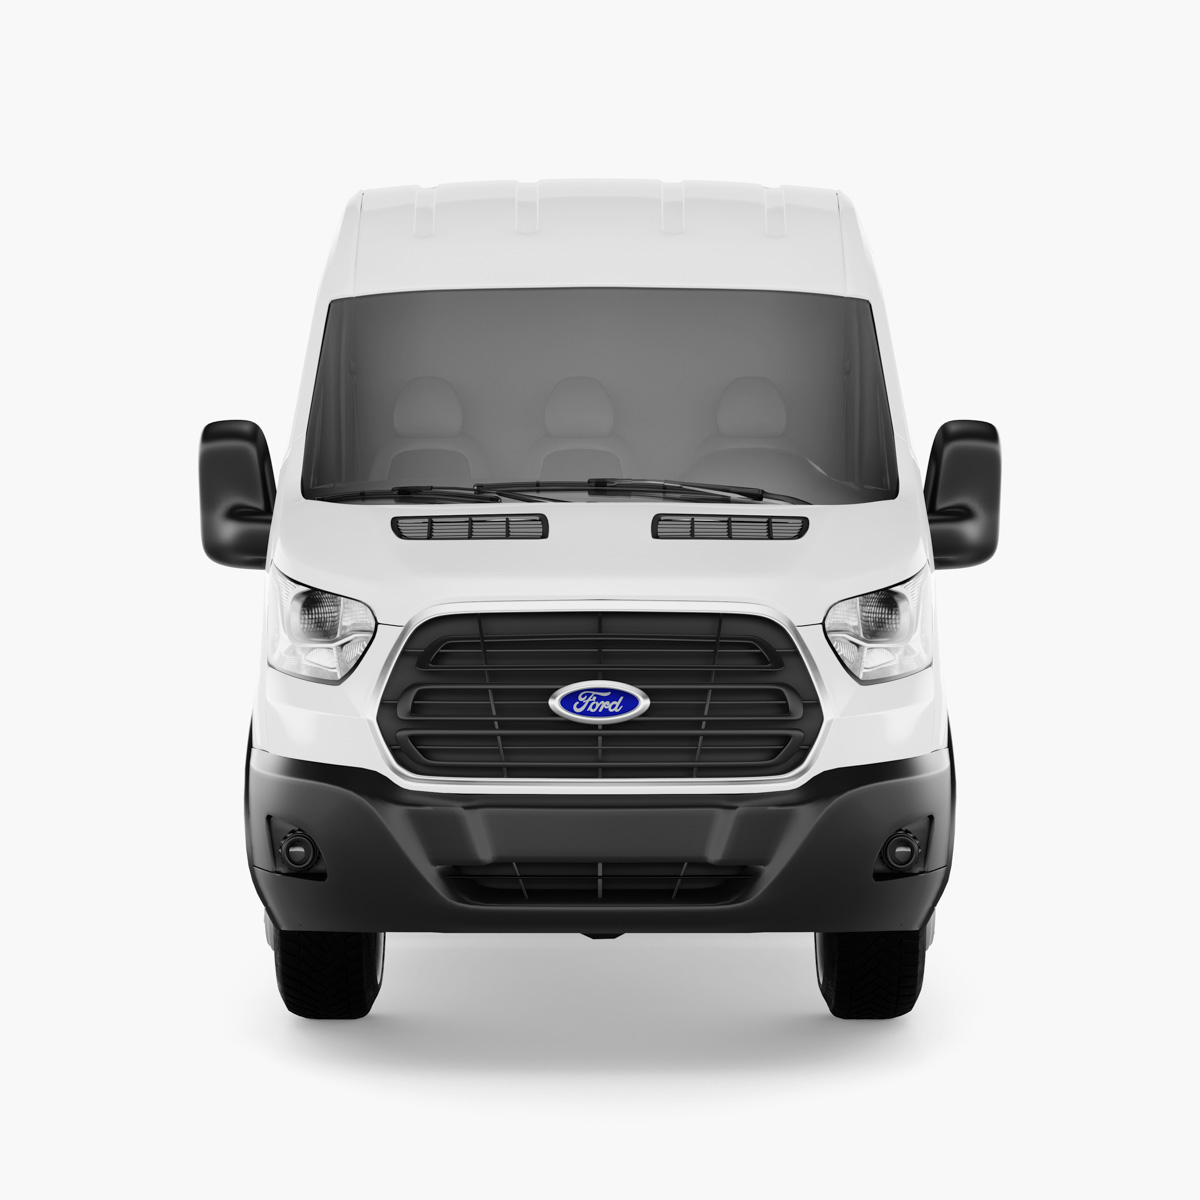 12_Ford Transit Truck Mockup - Front View_Preview3